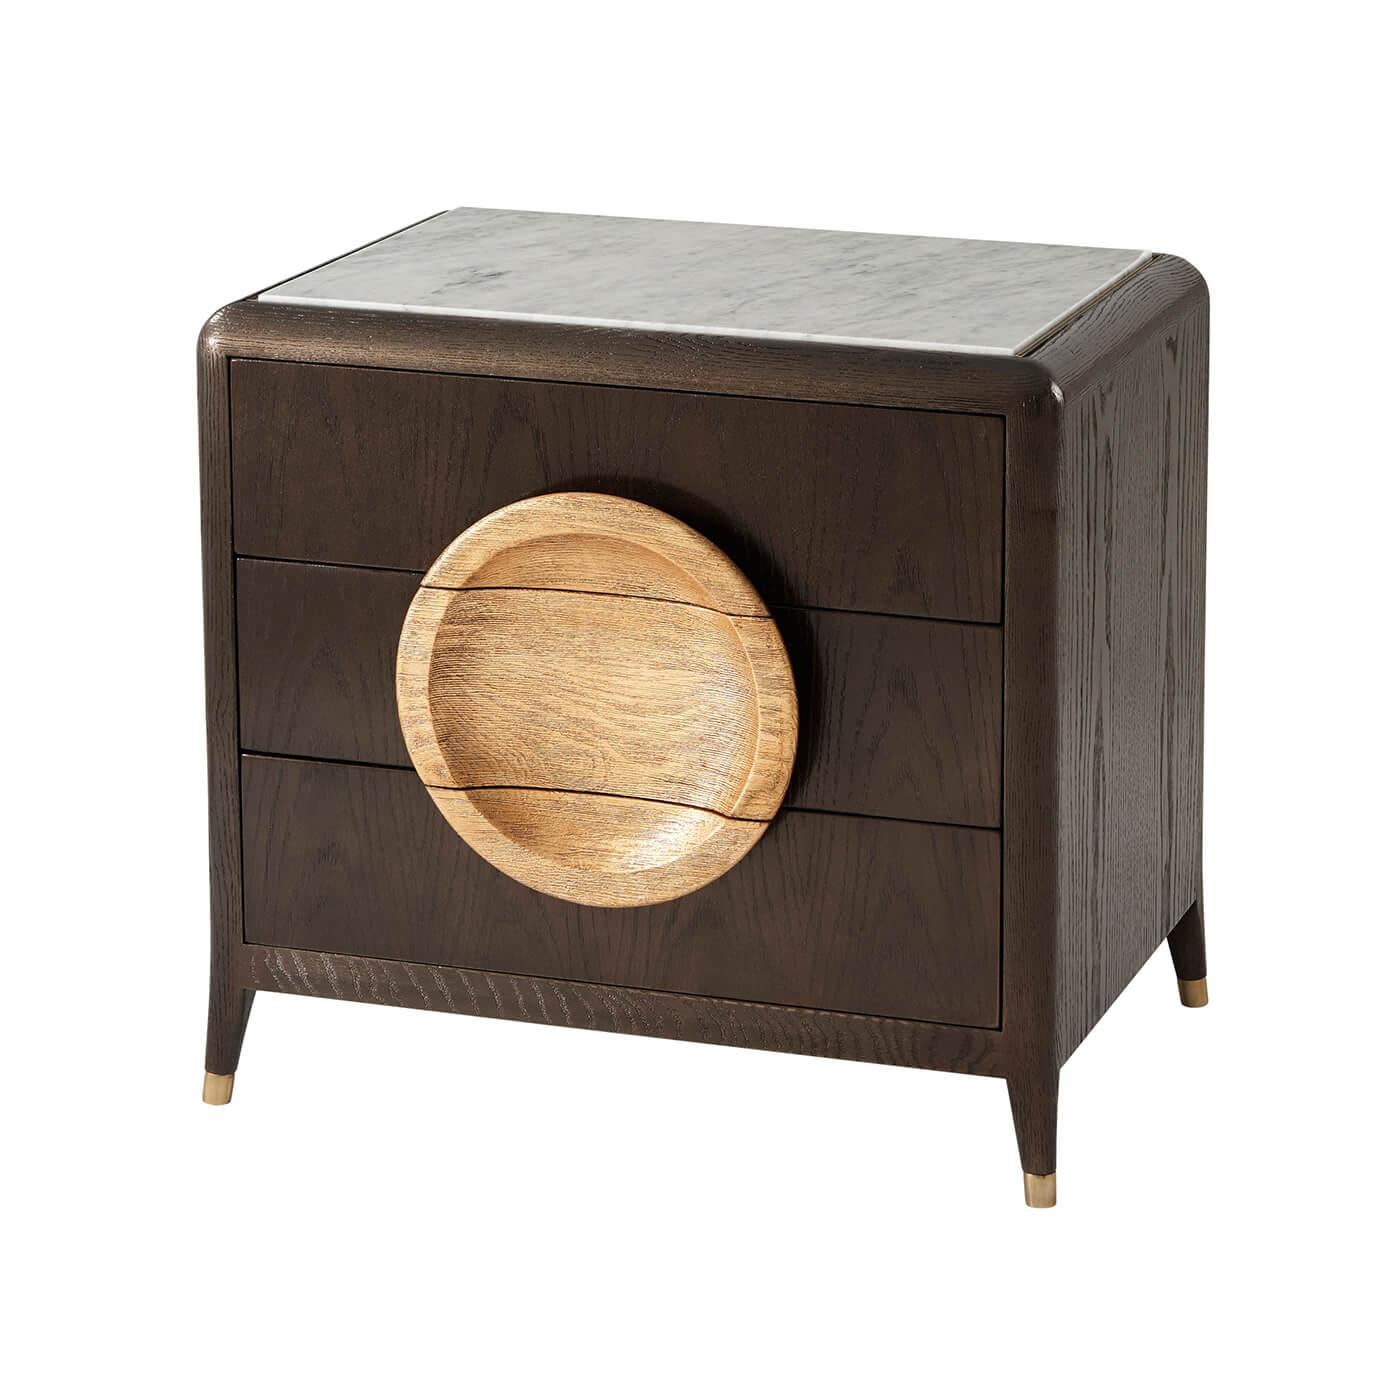 Modern oak and brushed crown oak veneered nightstands with a bronze finish, an inset Bianco Carrara marble top and three drawers with bold brushed oak gallery handles, raised on splayed turned and tapered legs with brass finish caps.

Dimensions: